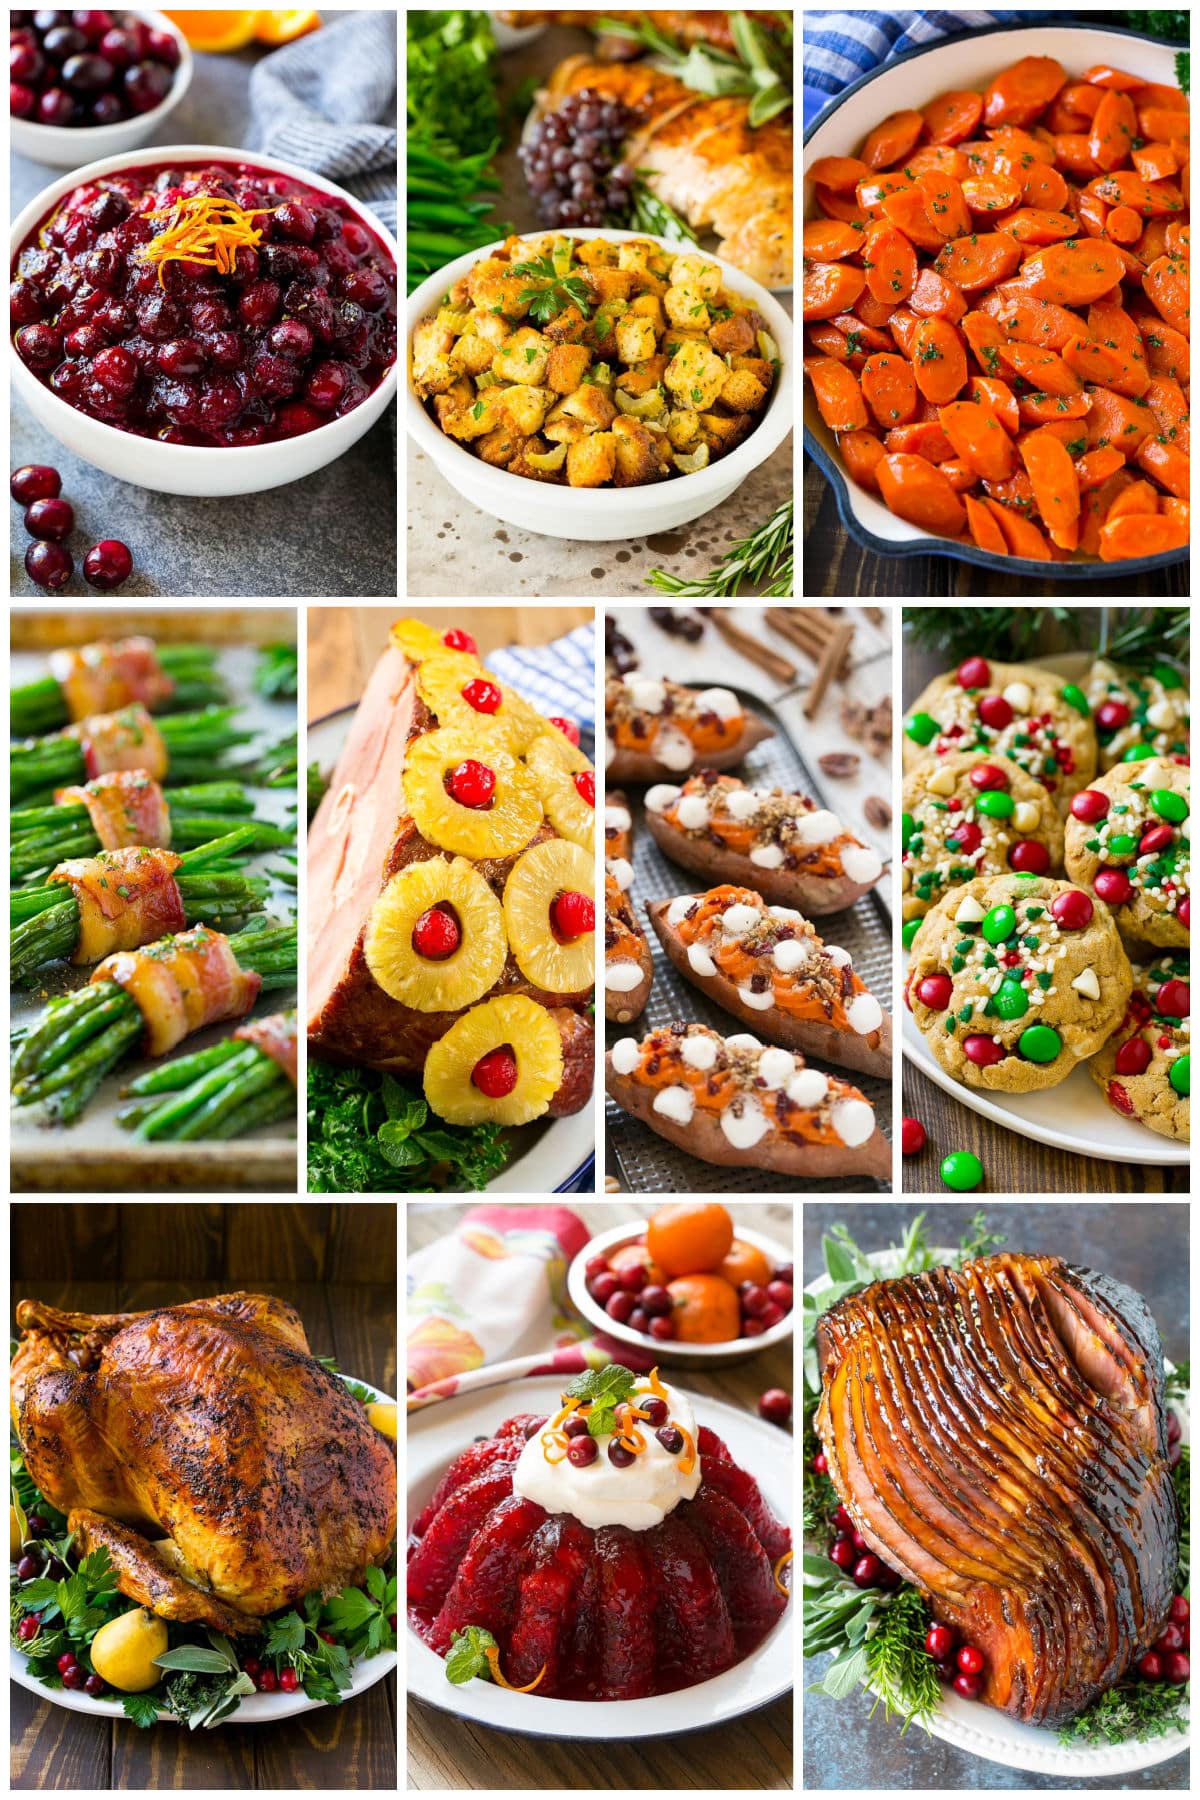 A group of festive holiday recipes like cranberry orange sauce, Christmas monster cookies and green bean bundles.